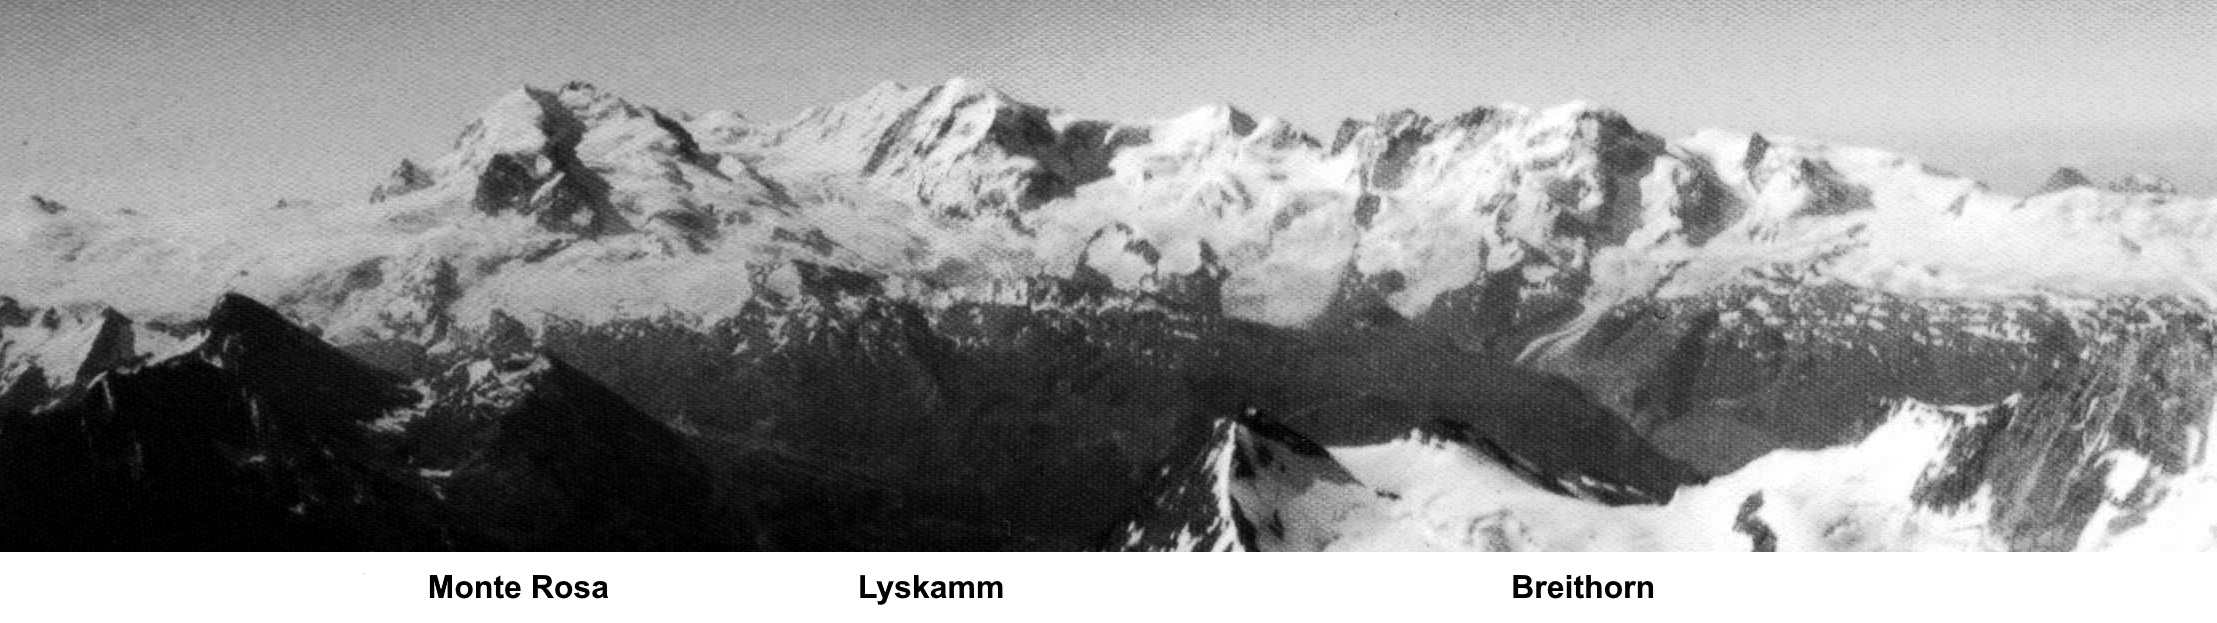 Monte Rosa, Lyskamm and Breithorn from the Weisshorn